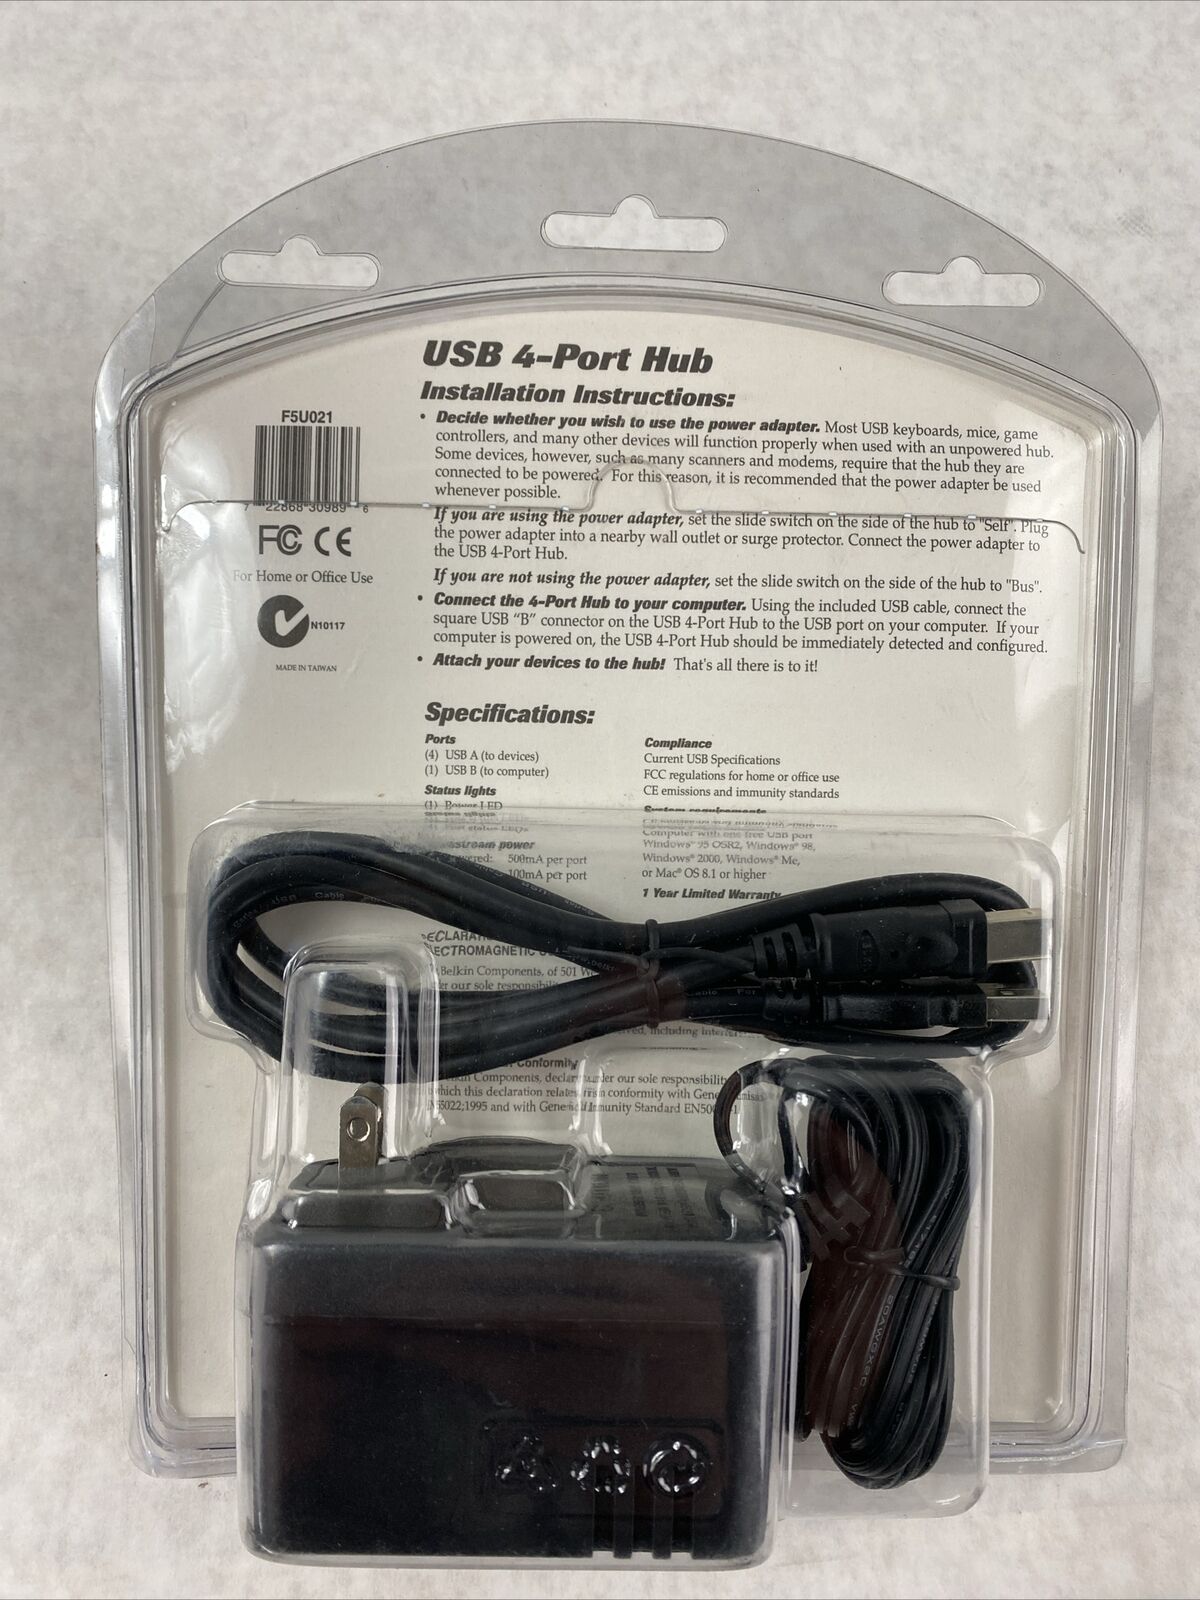 Belkin 4-Port Hub 4 USB Devices From Computer Fast 12MBPS SEALED